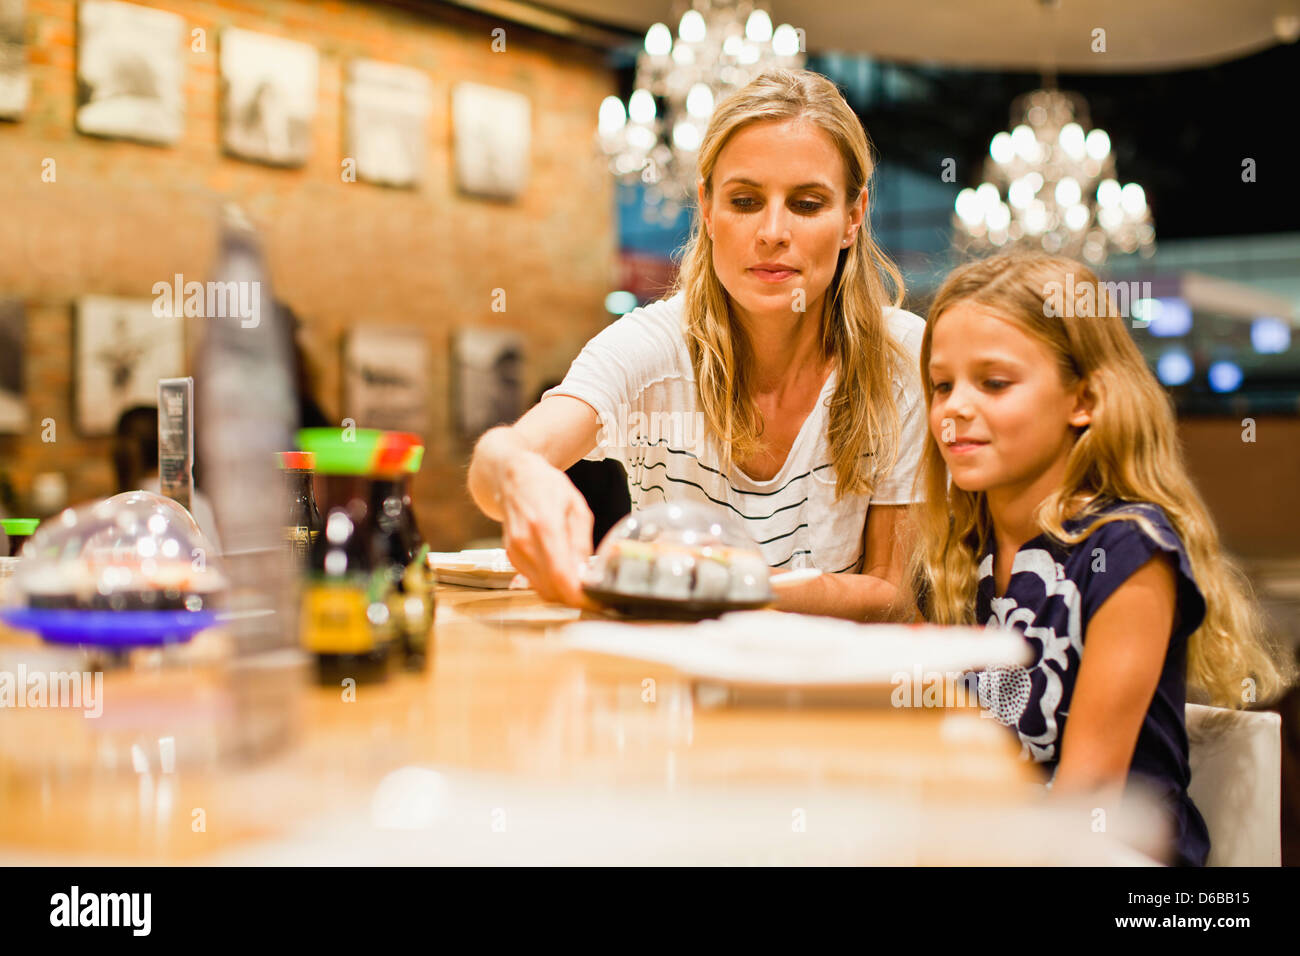 Mother and daughter eating at restaurant Stock Photo